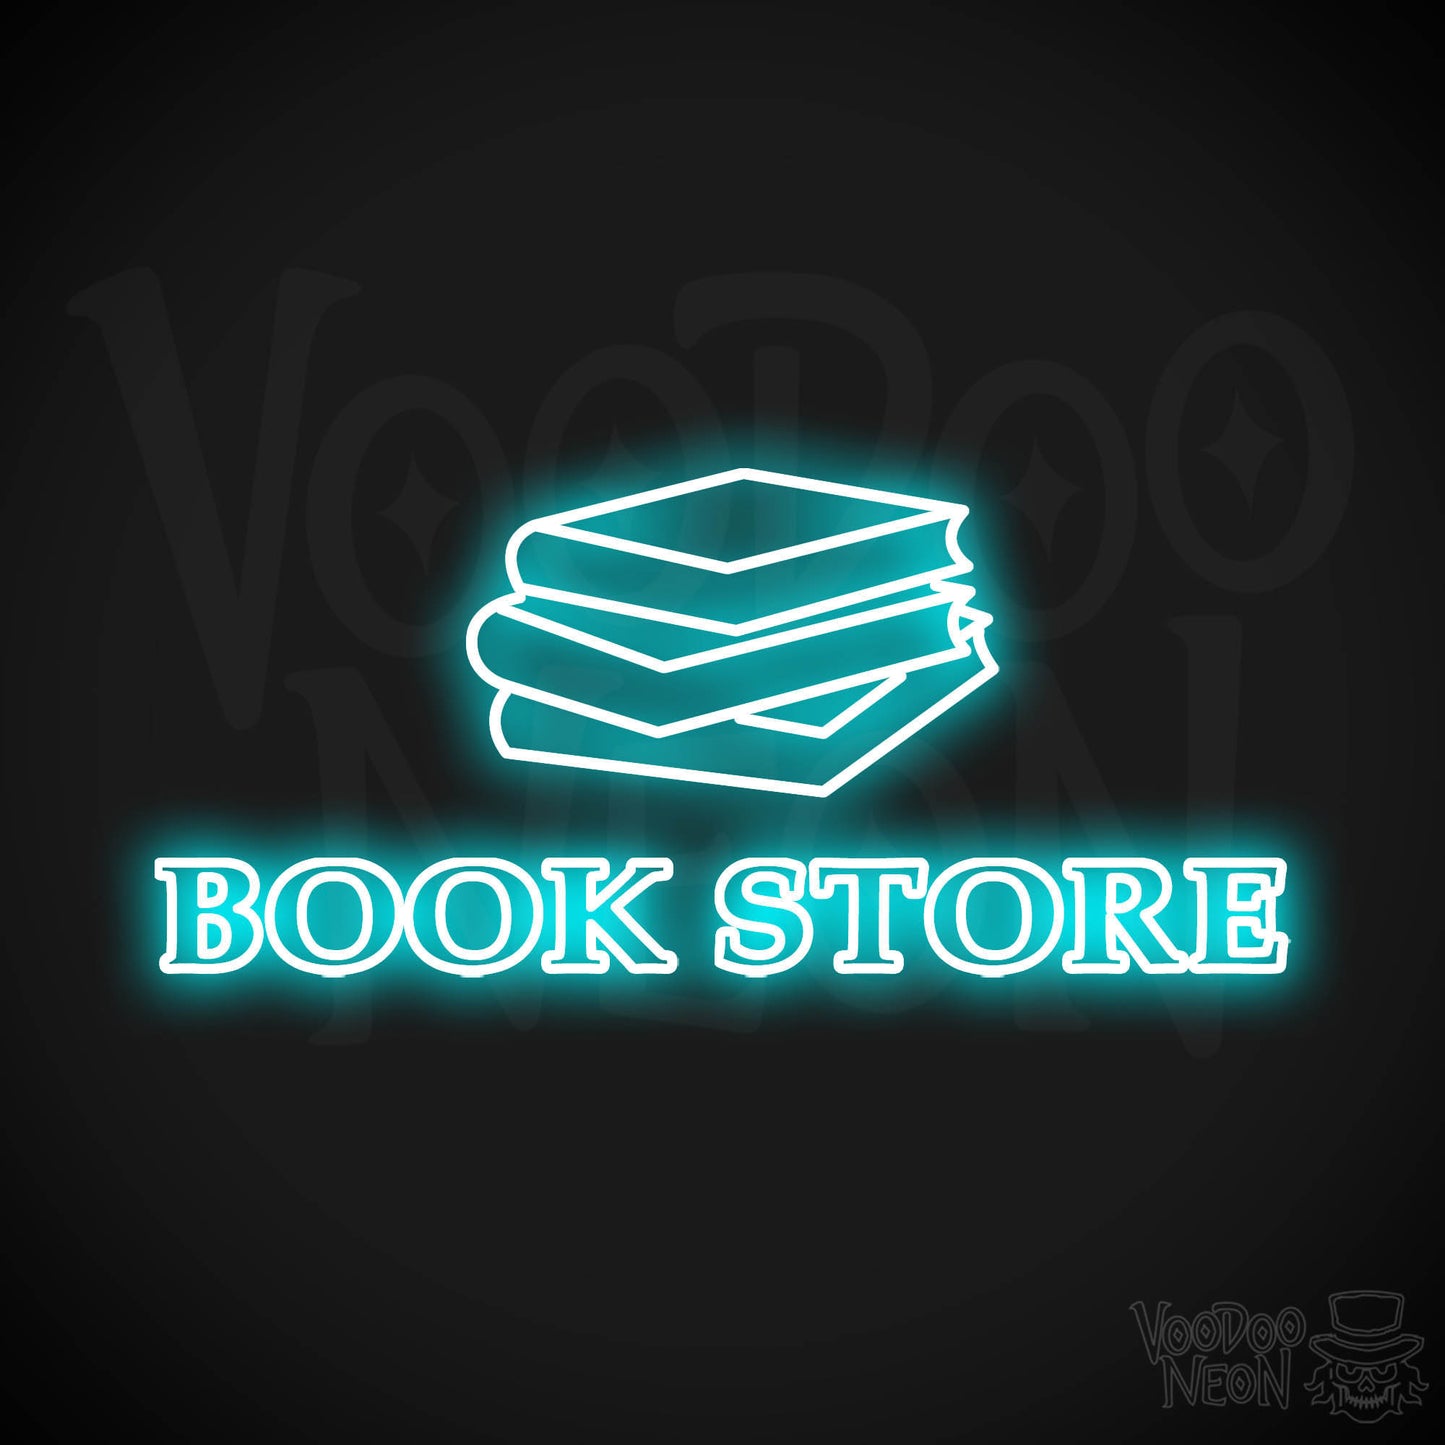 Book Store LED Neon - Ice Blue